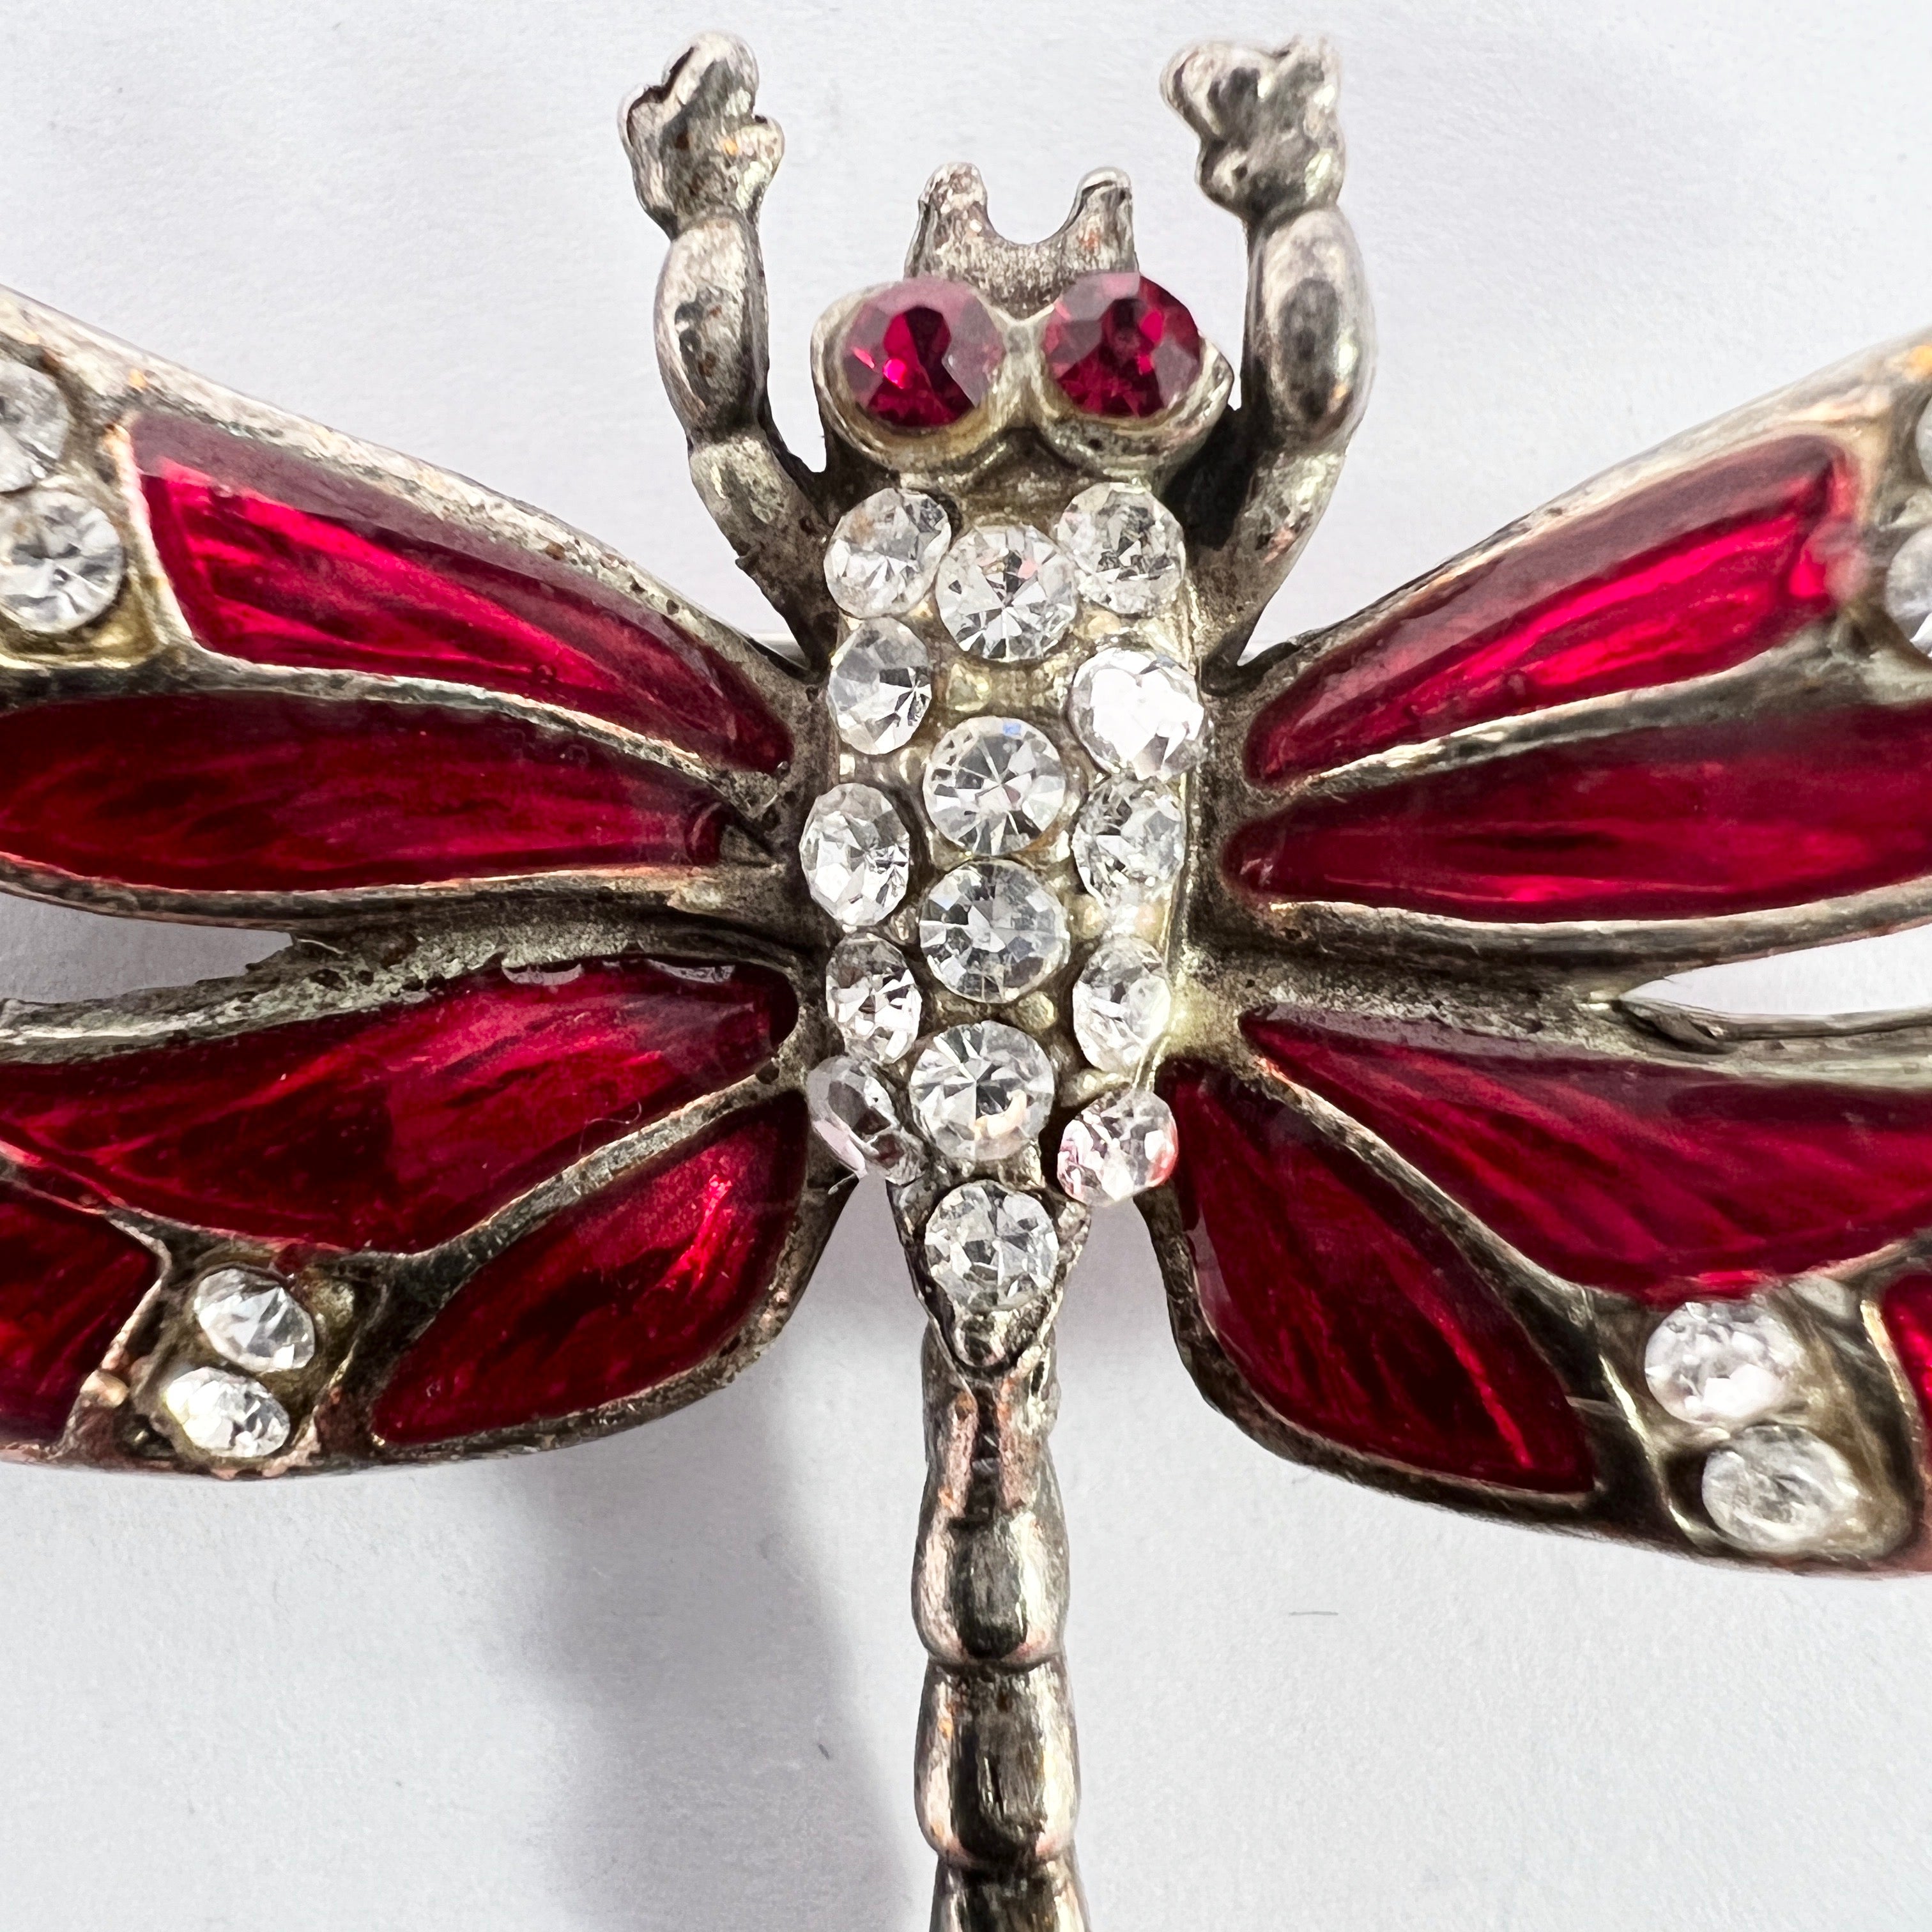 Early 1900s Solid Silver Red Enamel Paste Dragonfly Brooch.